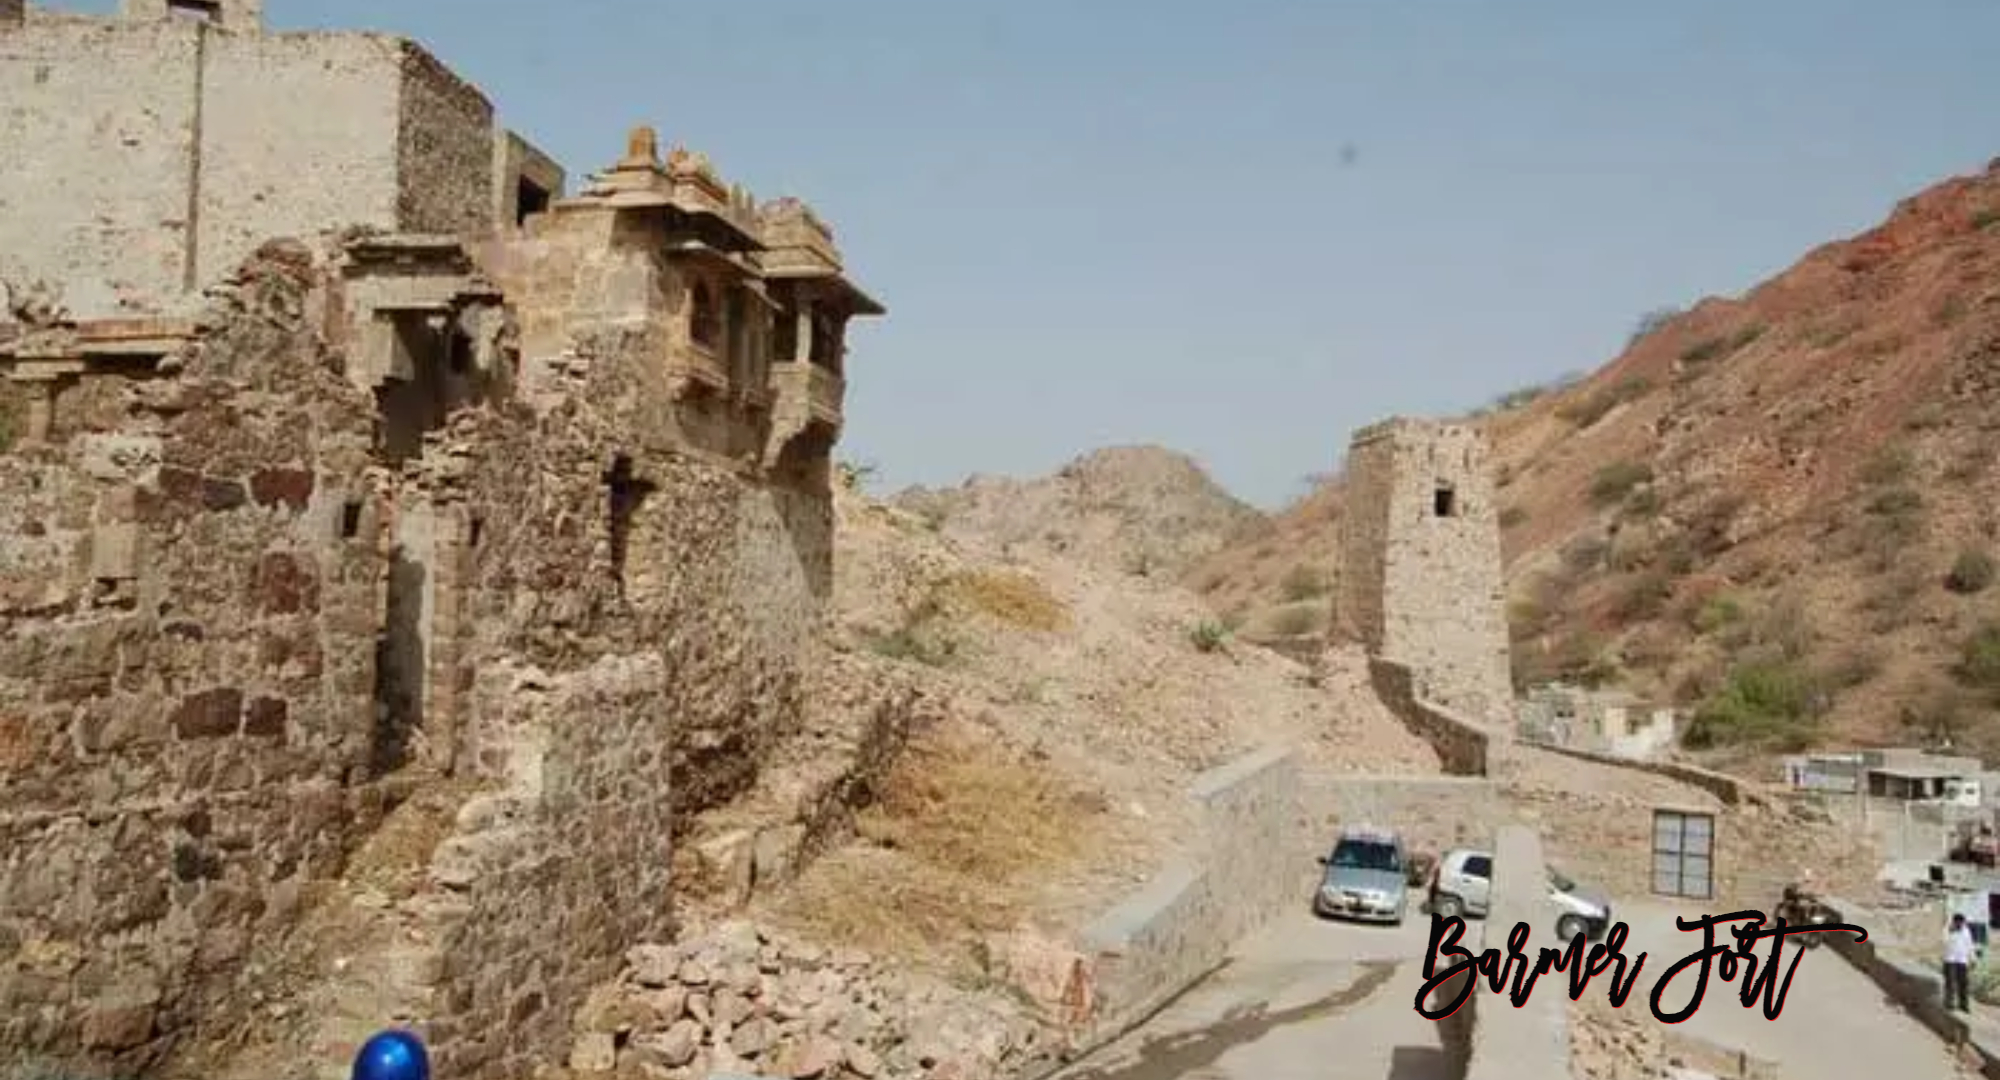 barmer tourist places, places to visit in barmer, 8 best places to visit in barmer, best places to visit in barmer